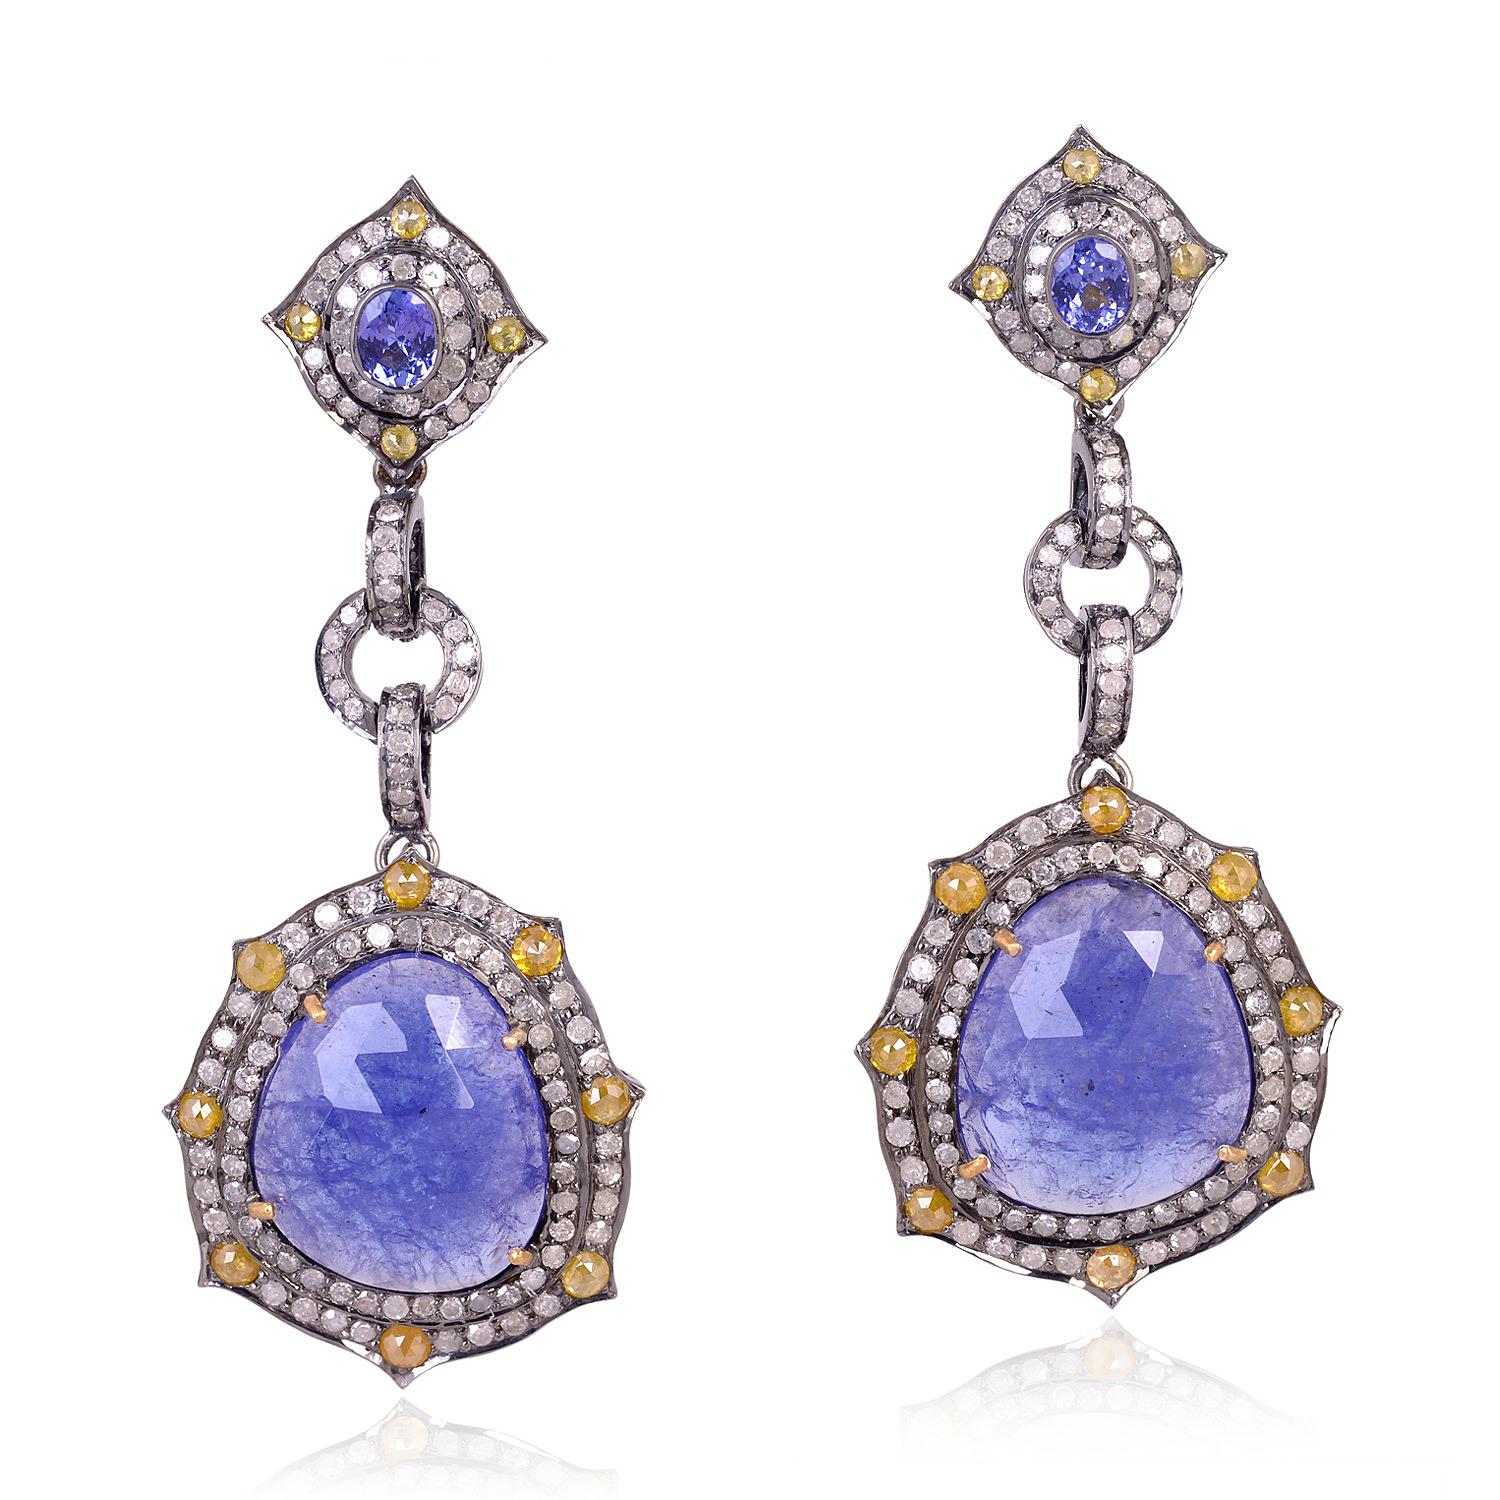 Mixed Cut Tanzanite Dangle Earrings Surrounded by Pave Diamonds Made in Gold & Silver For Sale